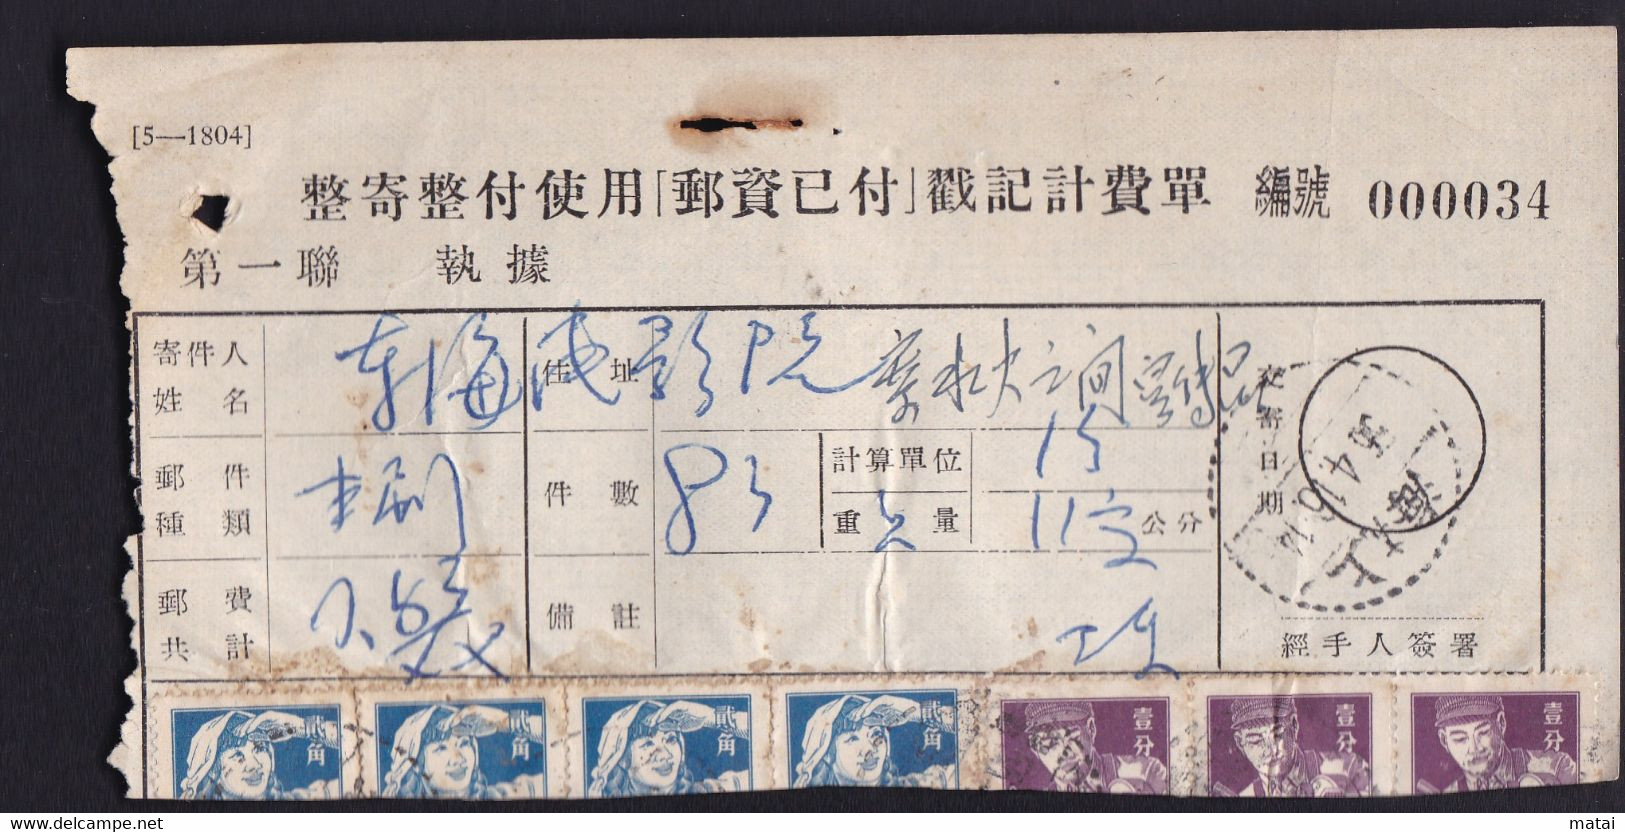 CHINA  CHINE CINA 1956 SHANGHAI POST OFFECE DOCUMENT WITH STAMPS - Covers & Documents